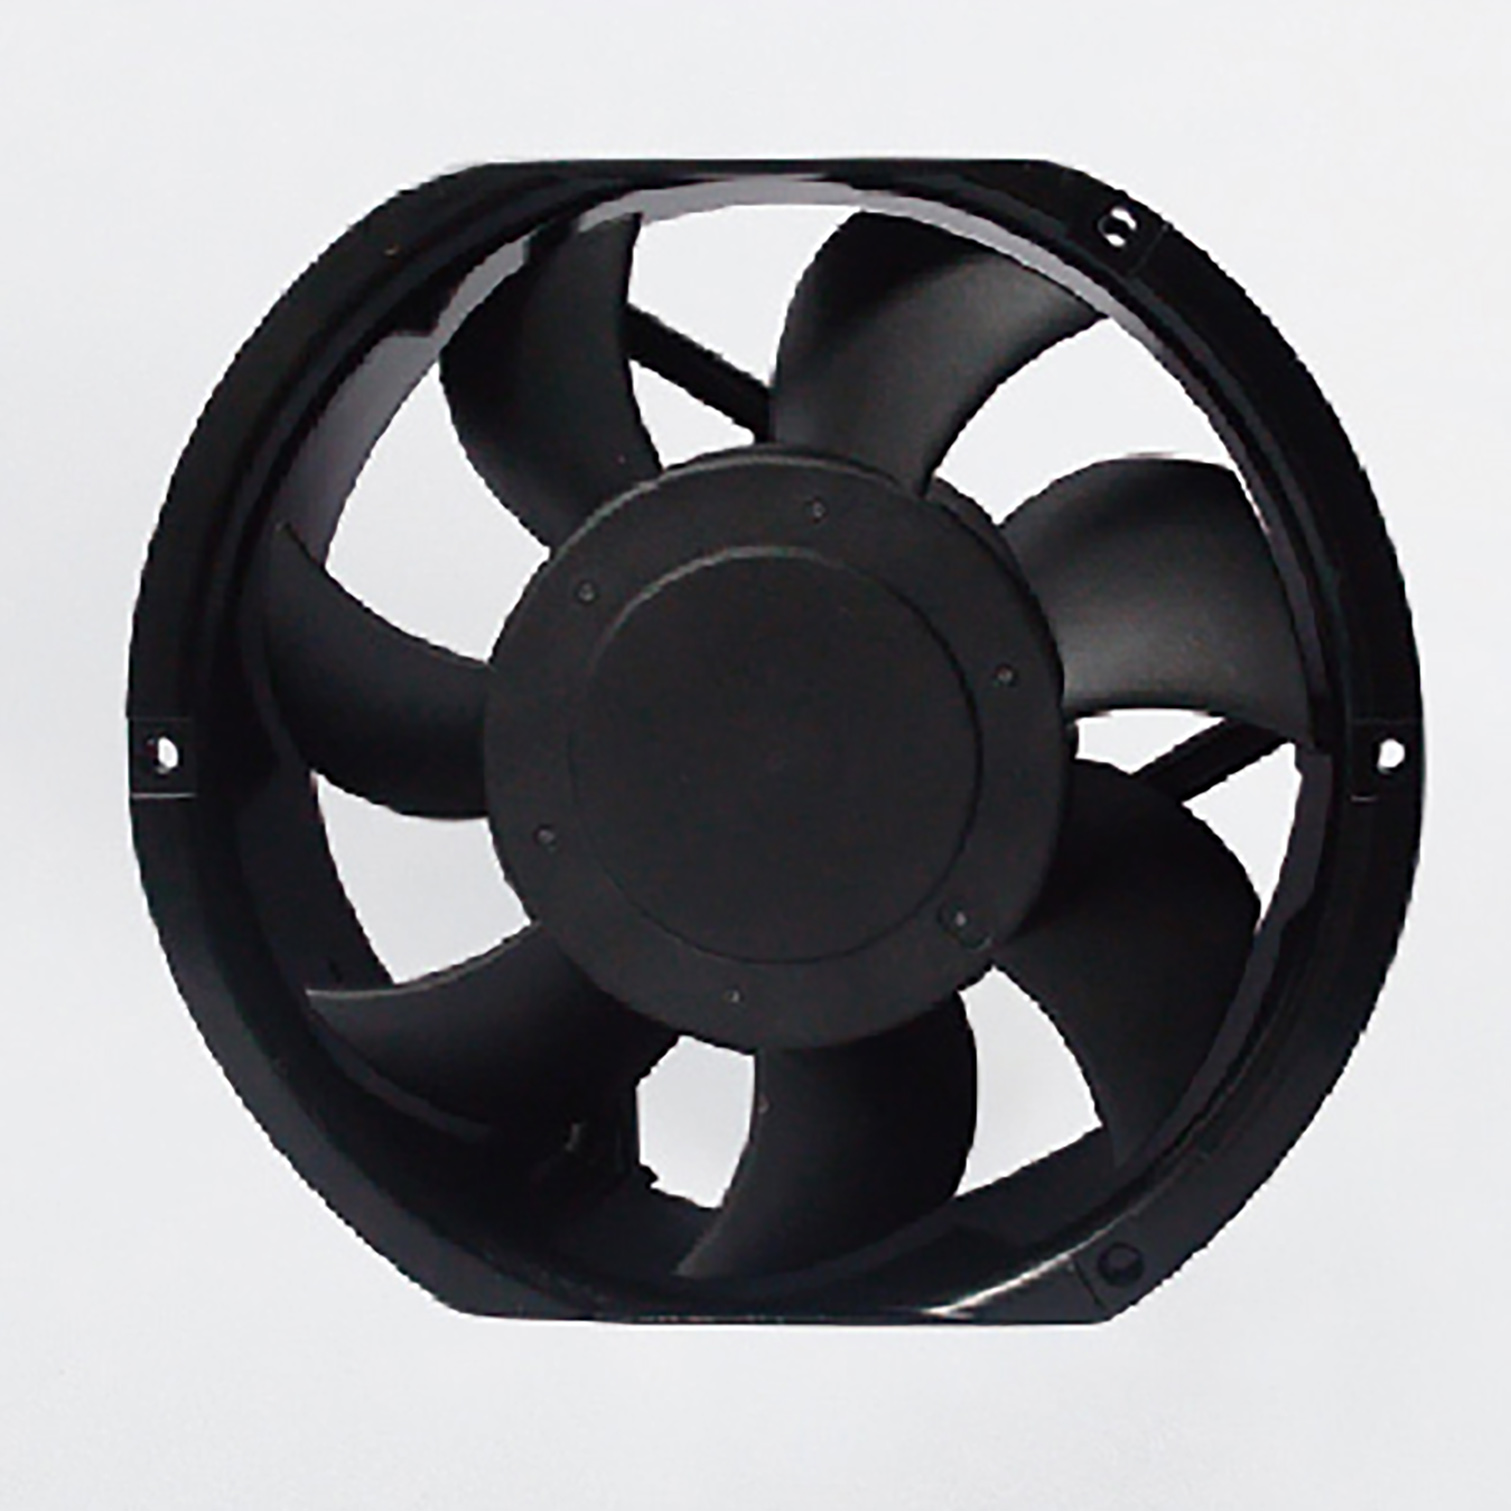 Export trade cabinet DC fan manufacturers